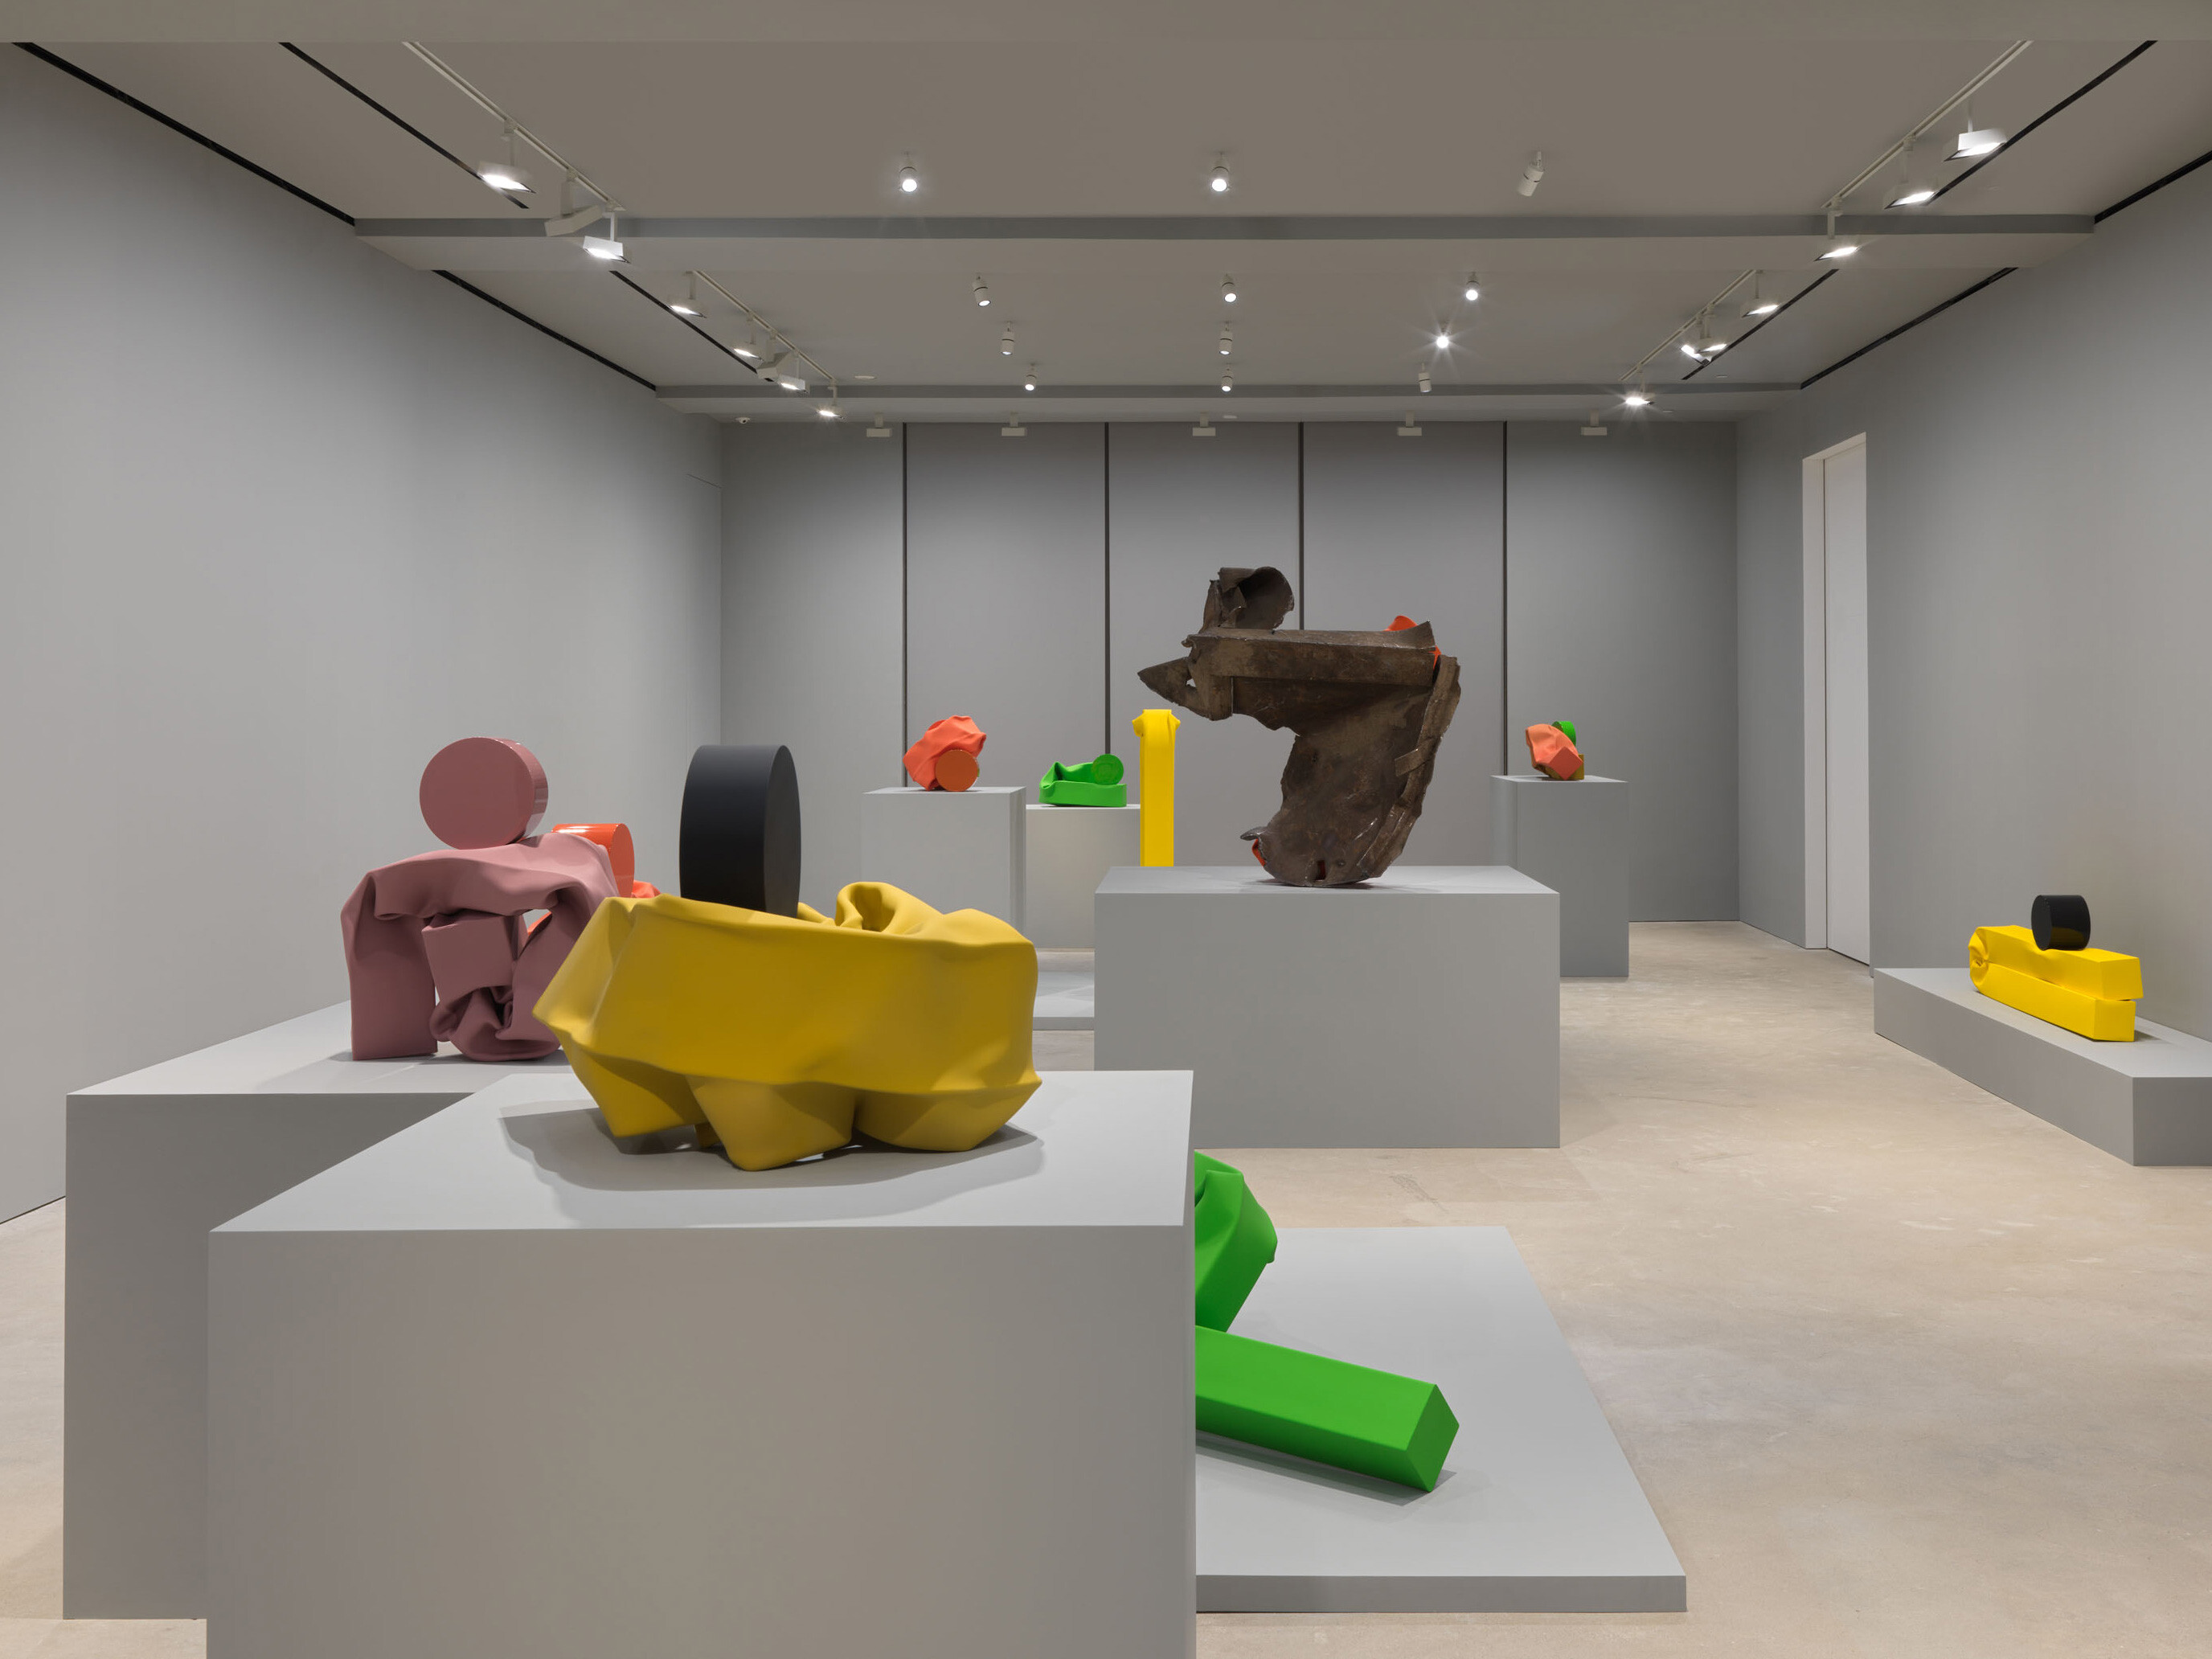 An installation view from the exhibition titled Carol Bove: Ten Hours at David Zwirner Hong Kong, dated 2019